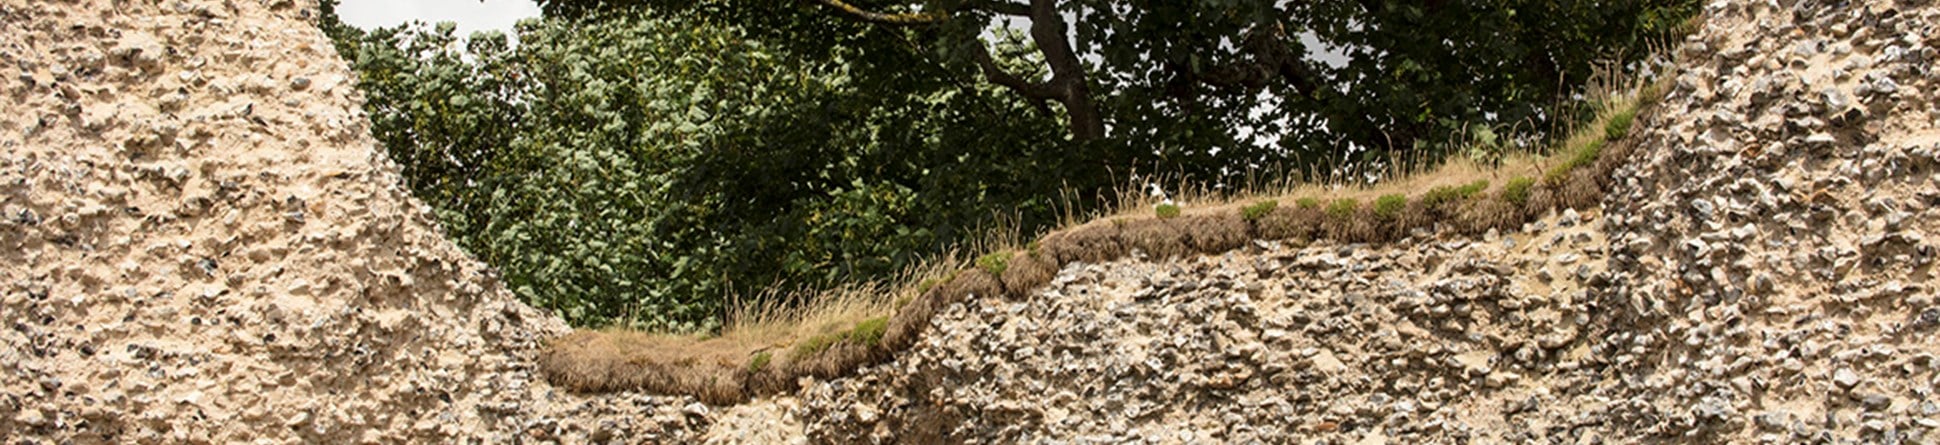 View of a grassy top on a rubble wall with trees in the background.